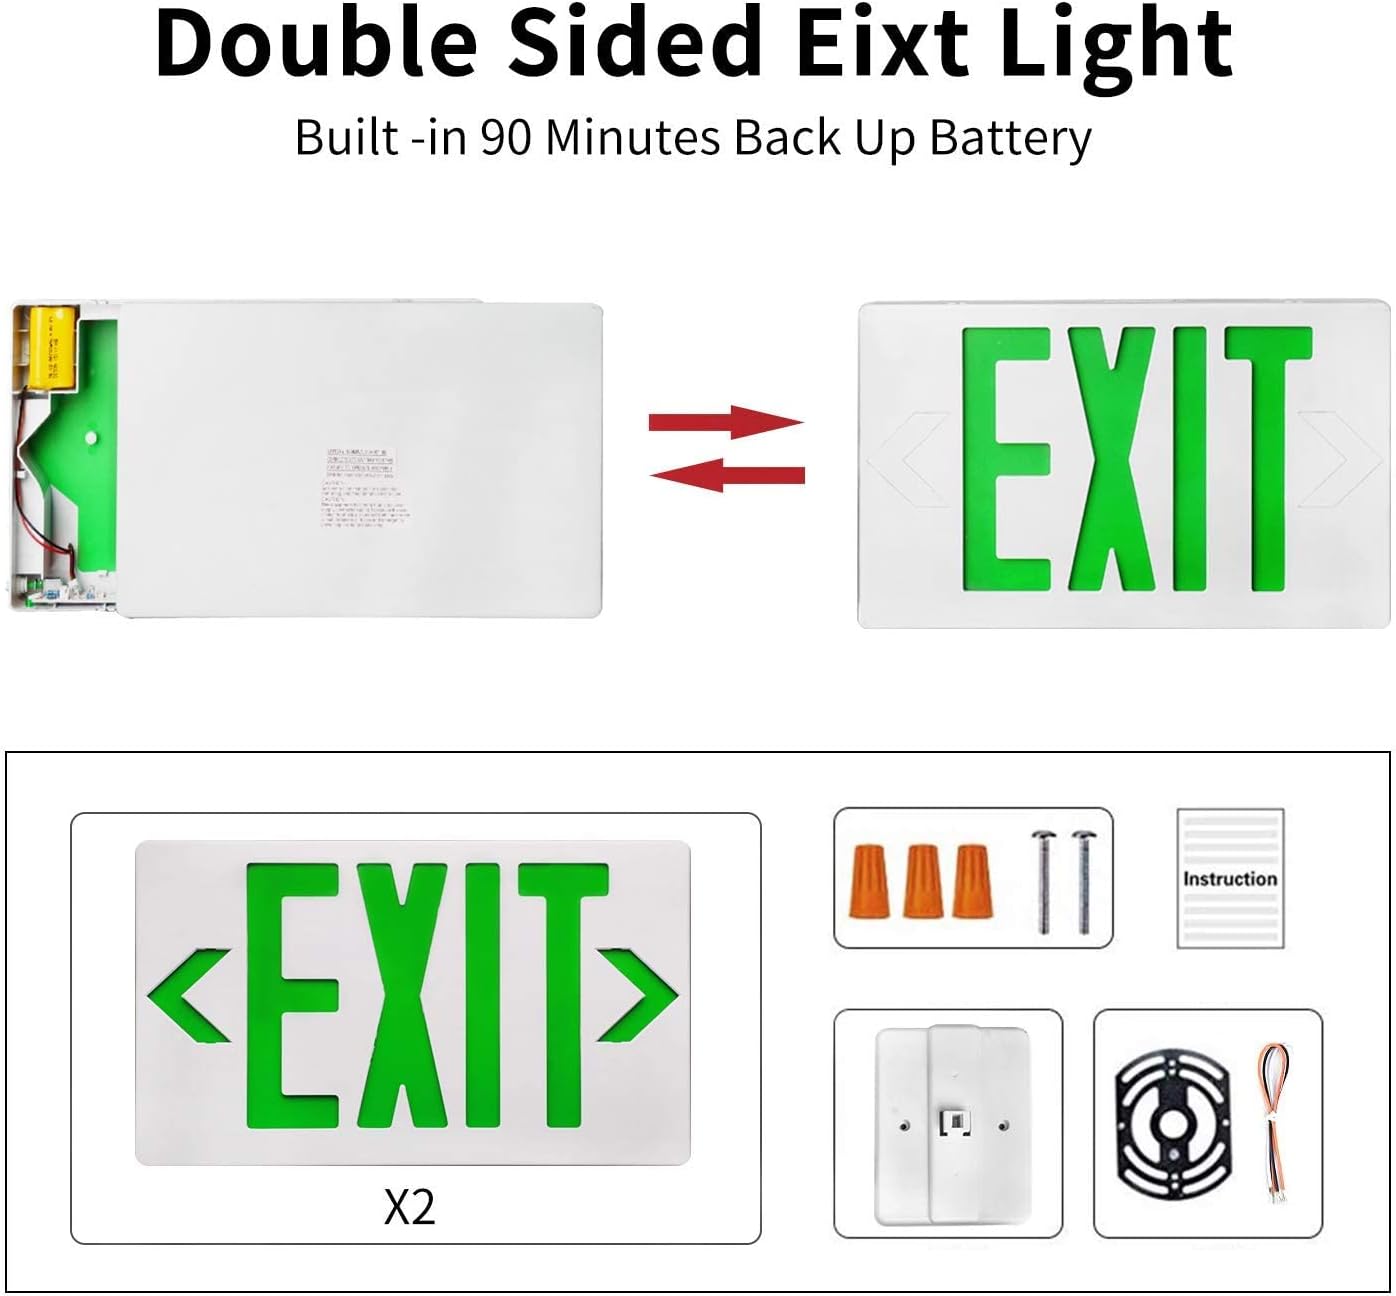 AKT LIGHTING GREEN LED Exit Sign Emergency Light with Battery Backu, Double Face Hardwired GREEN Letter Emergency Exit Lighting For, Restaurant, Commercial, Supermarket, UL-Listed, 120-277